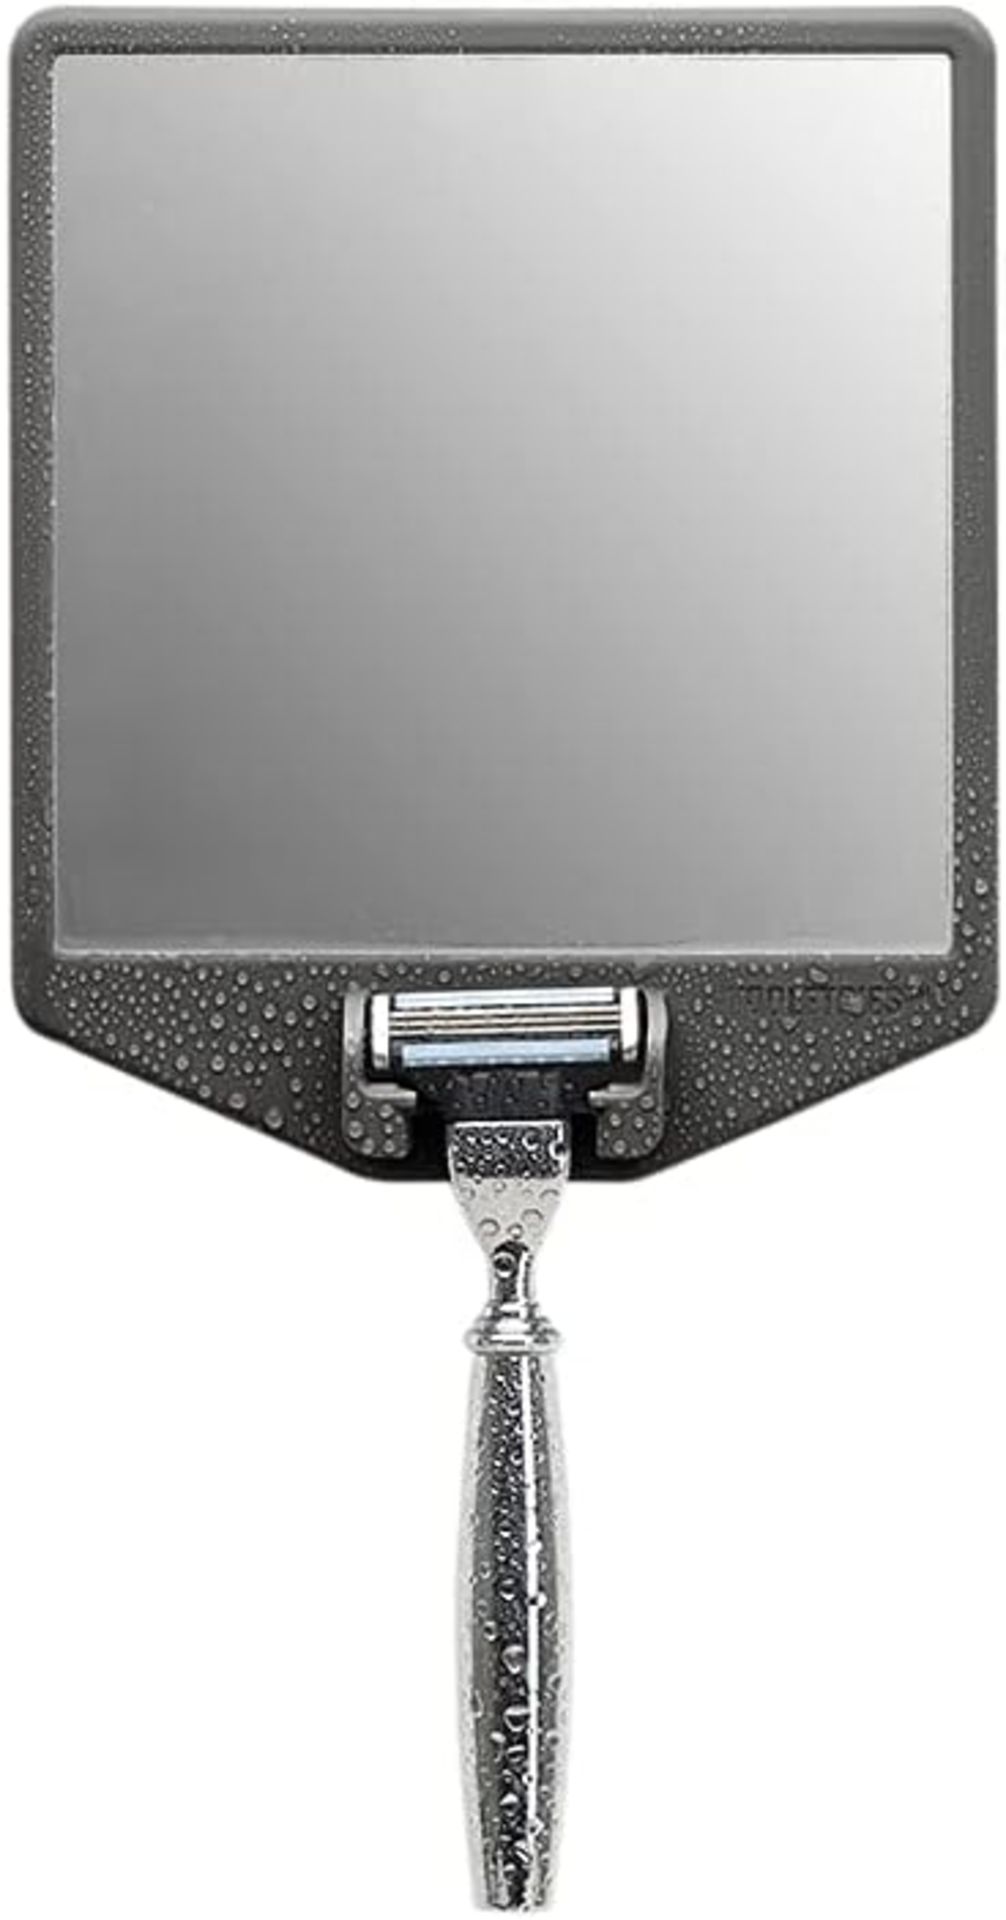 Tooletries The Joseph Mirror And Razor Holder Set, Charcoal x24. Est Retail Value £360 - Image 4 of 7